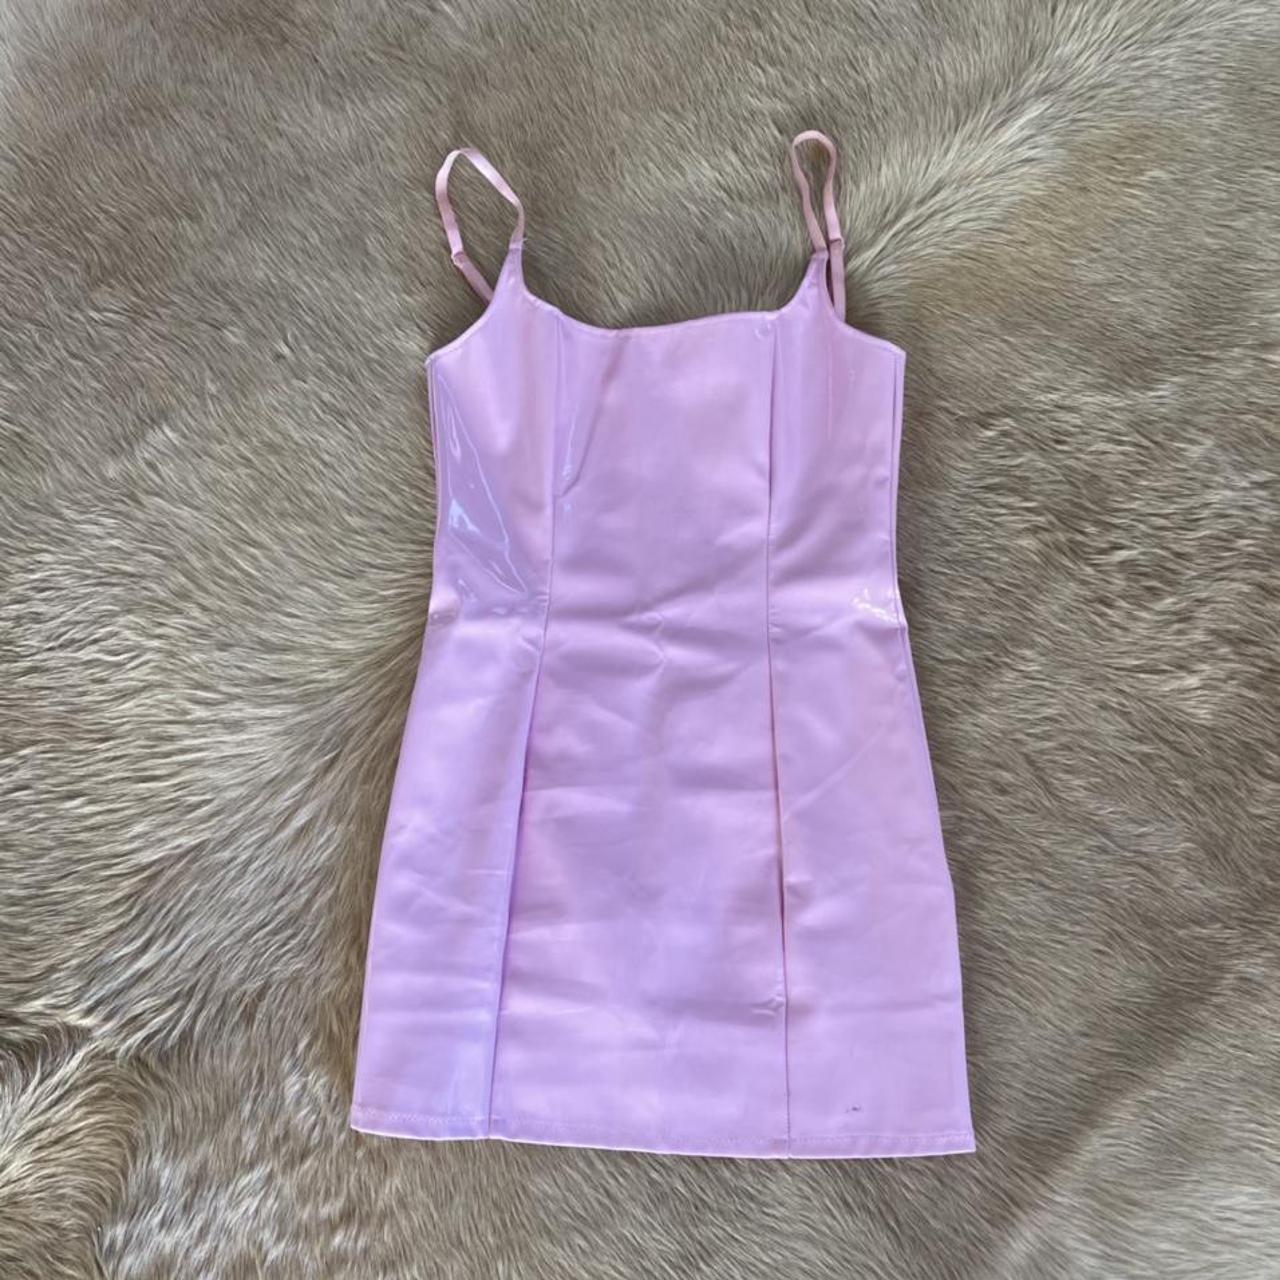 Pink Latex Dress from Pretty Little Thing! This... - Depop